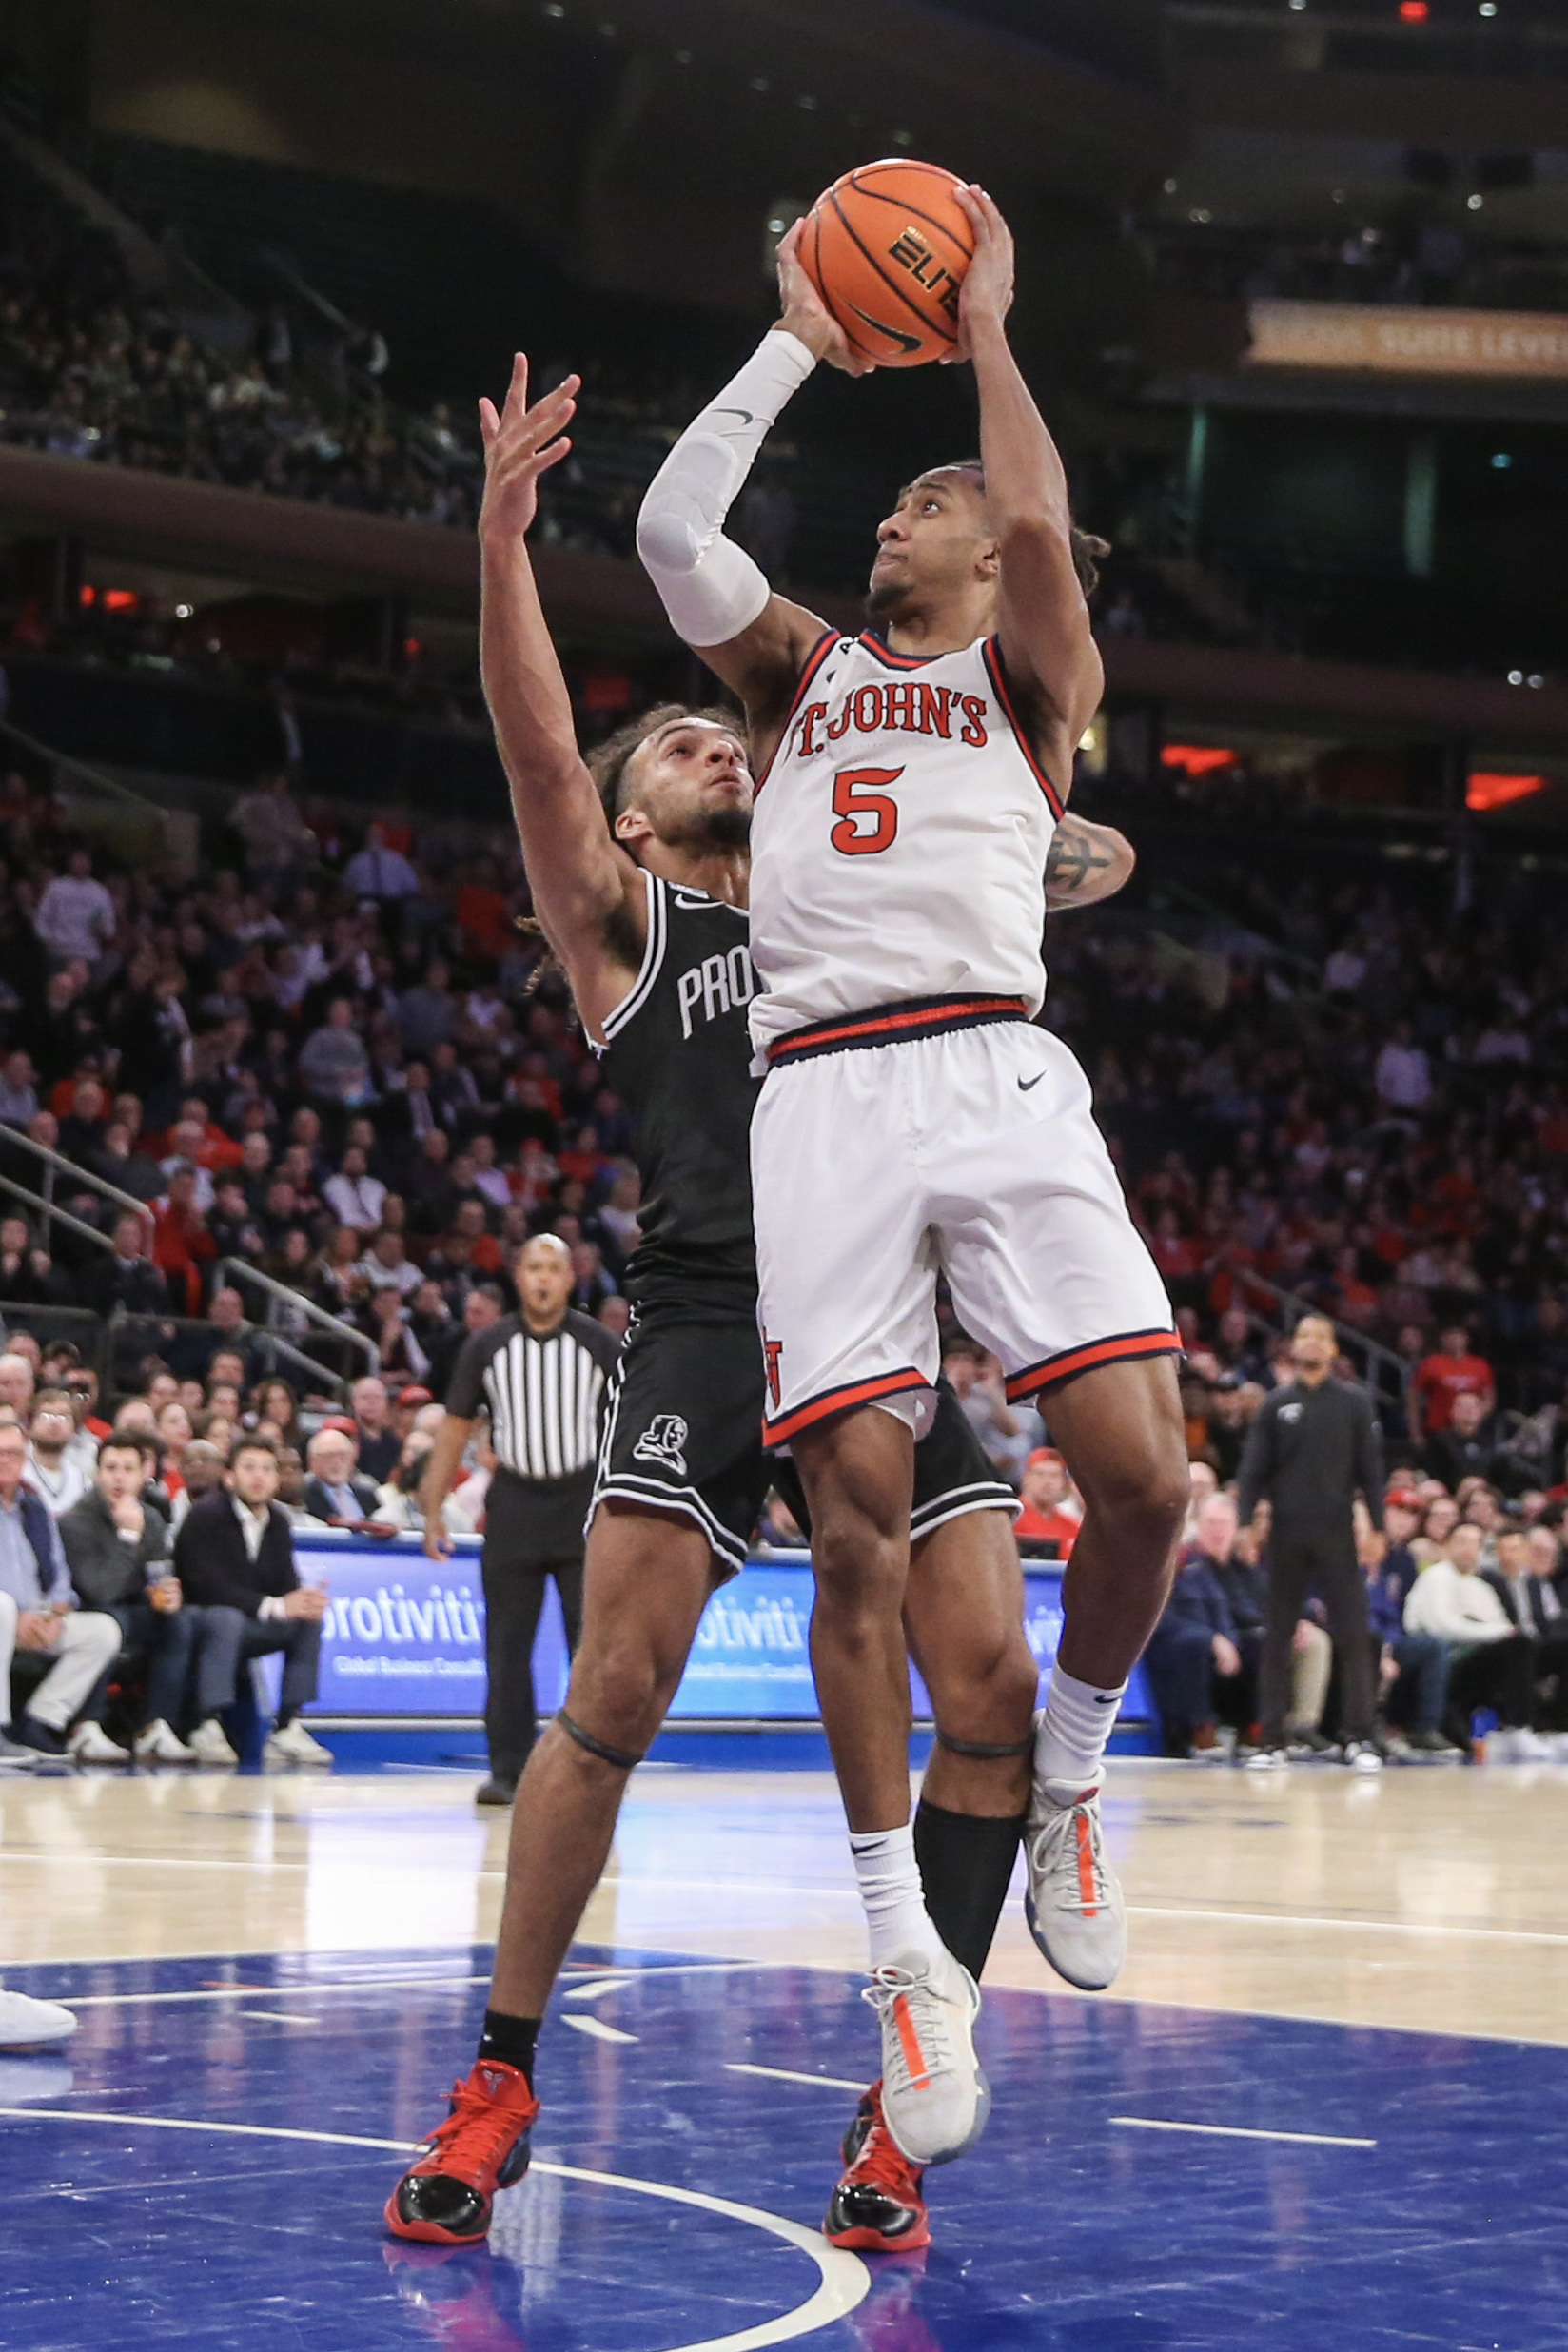 St. John's survives late to hold off Providence | Reuters